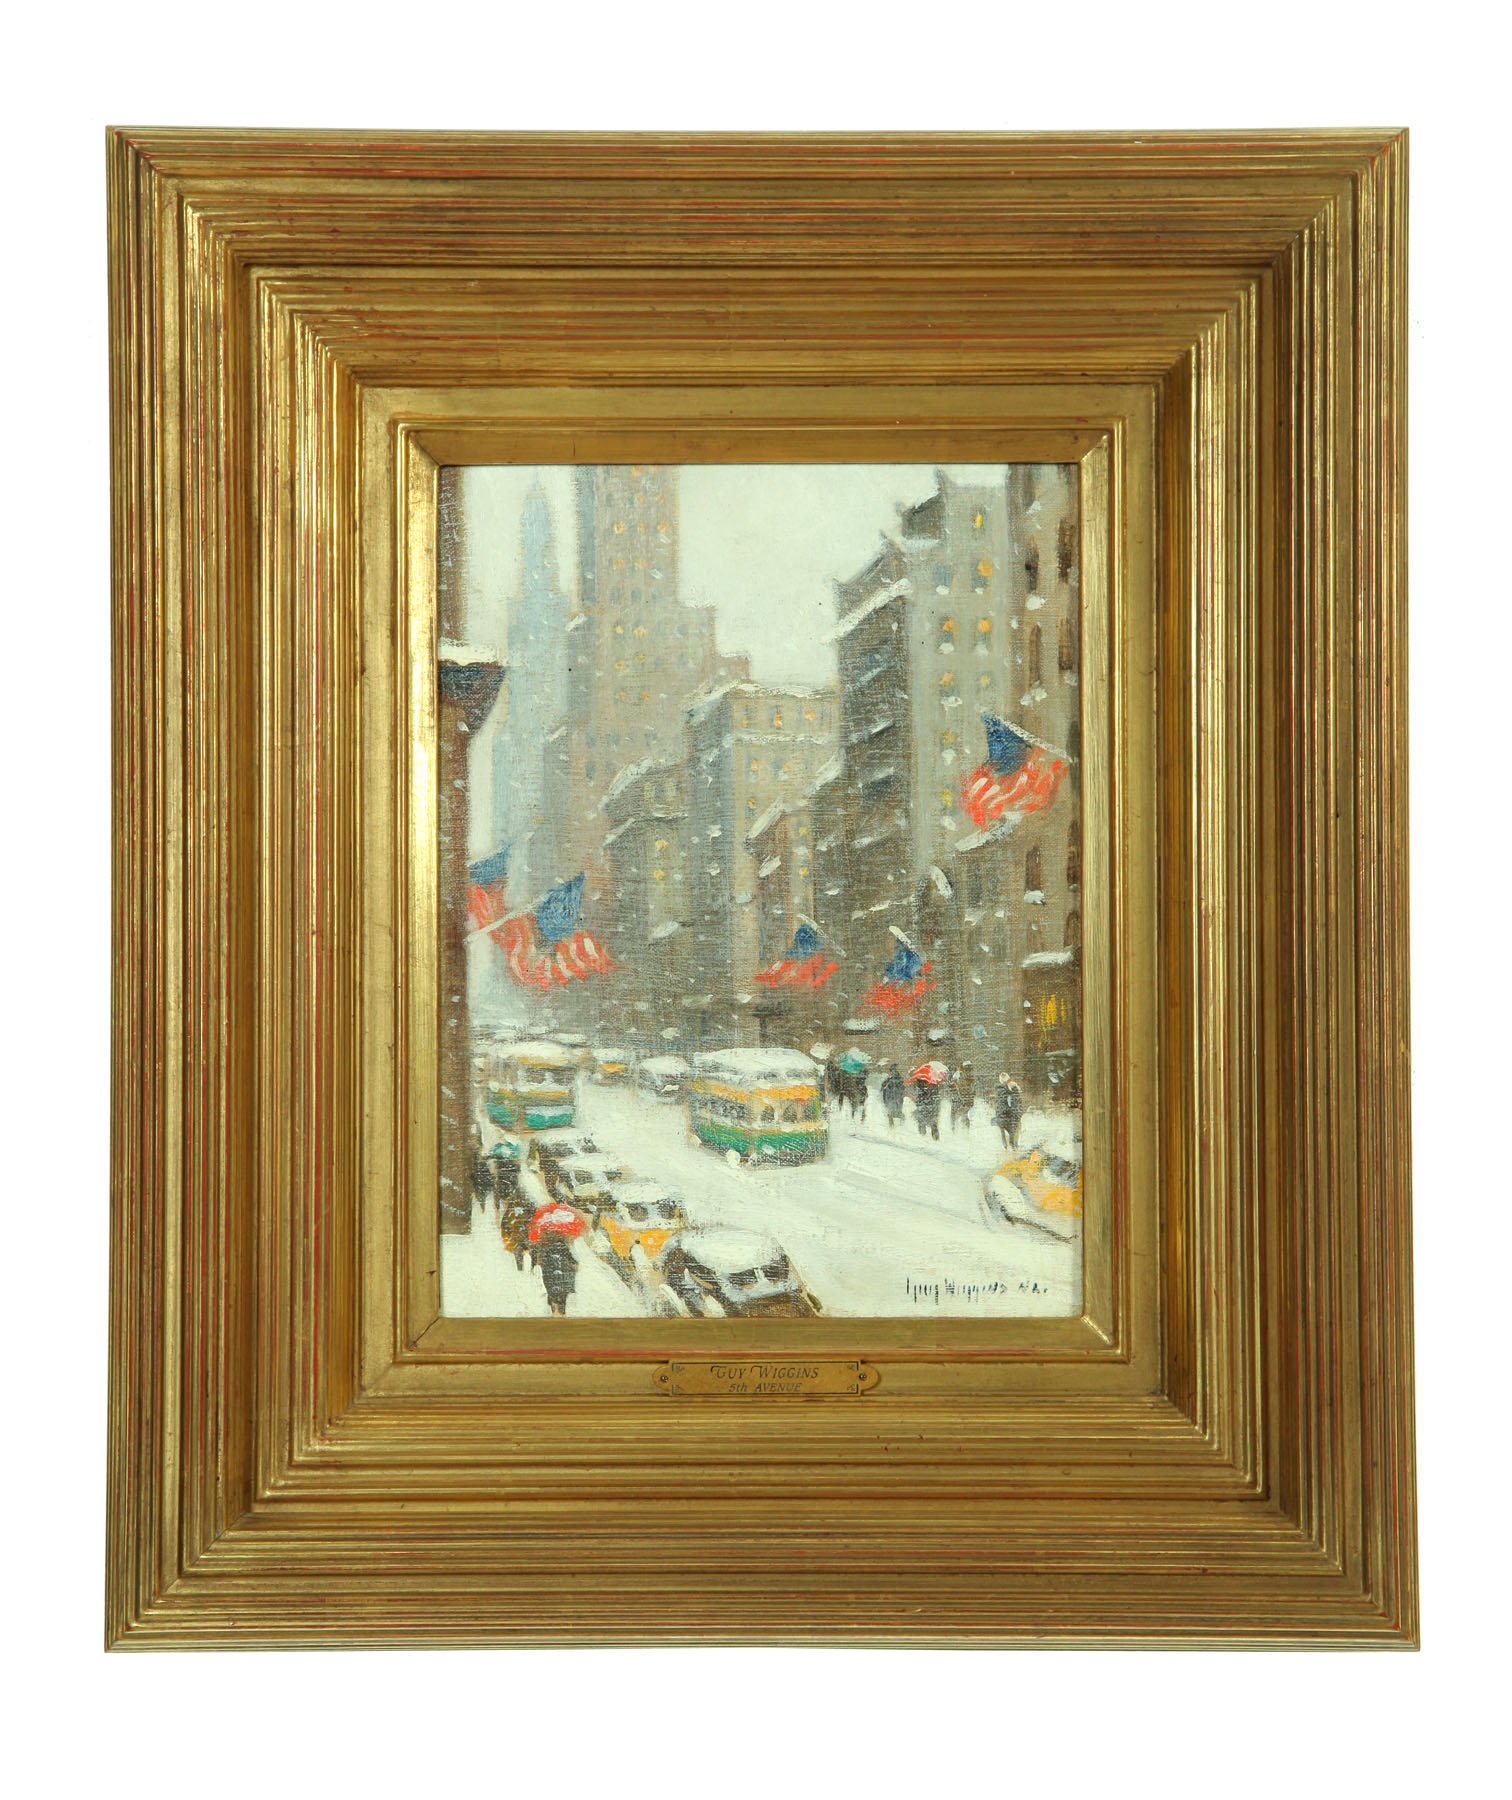 LOOKING DOWN 5TH AVE BY GUY CARLETON 1136b7